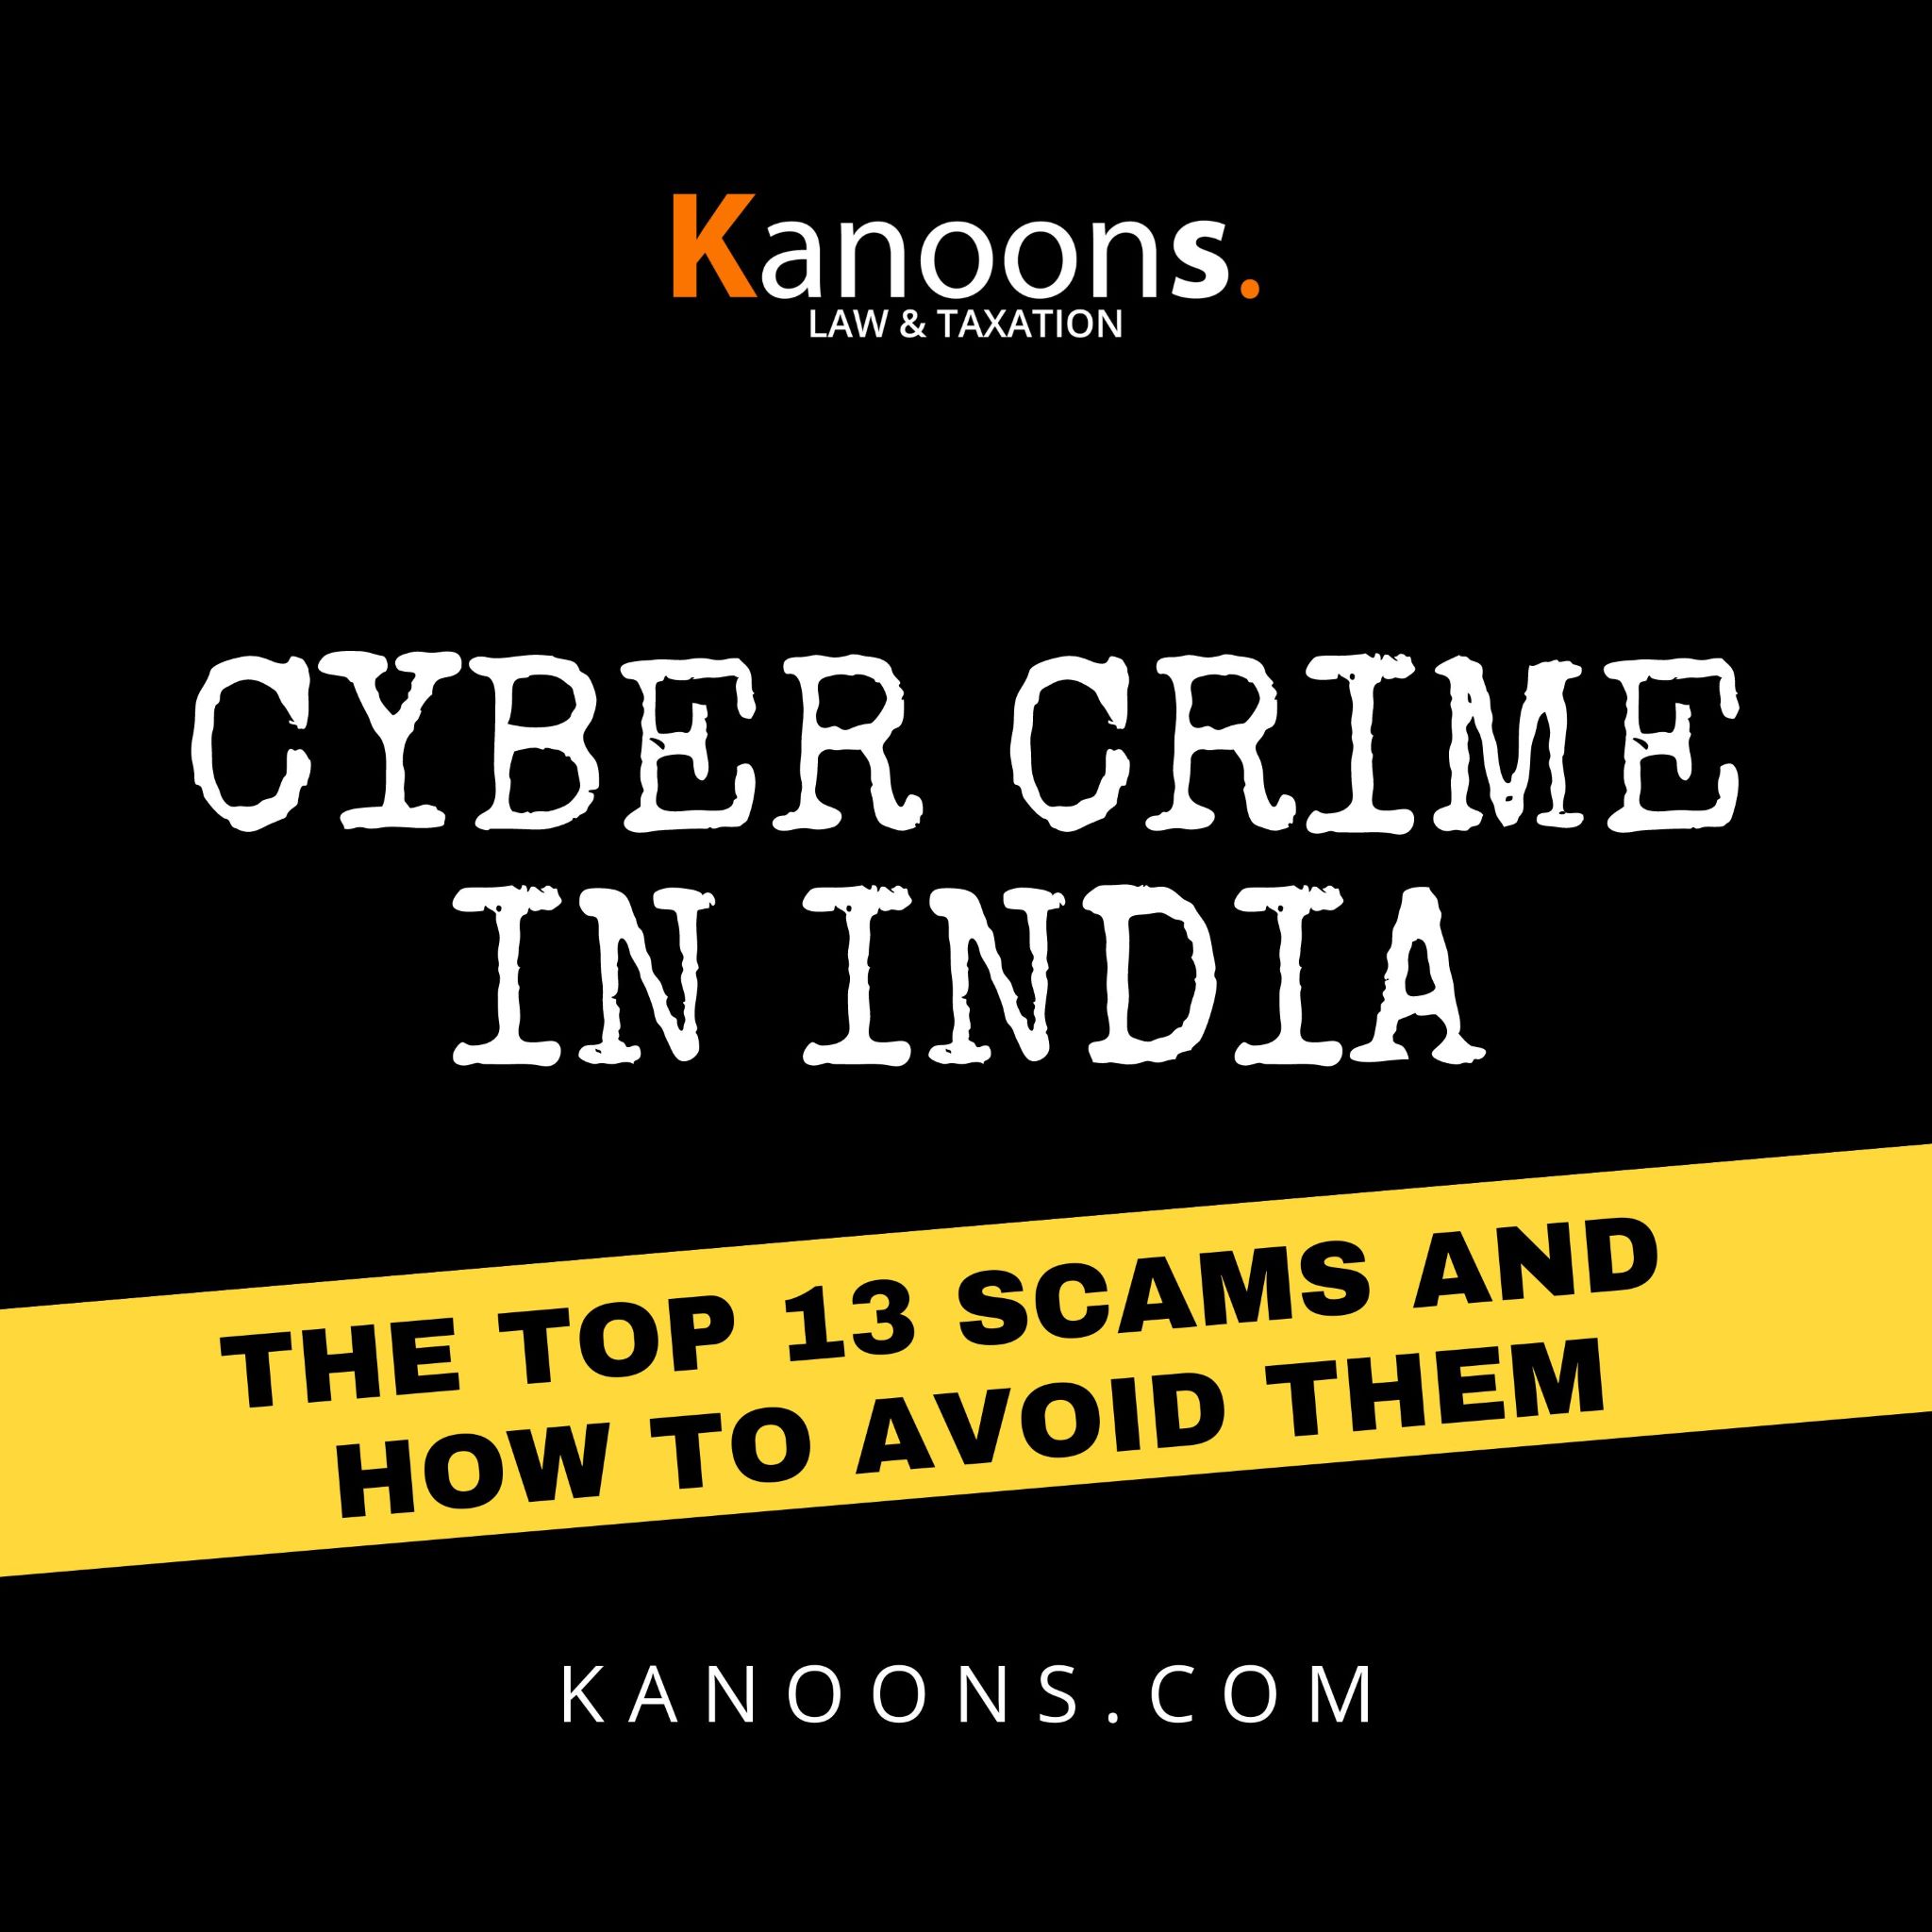 Cyber Crime in India